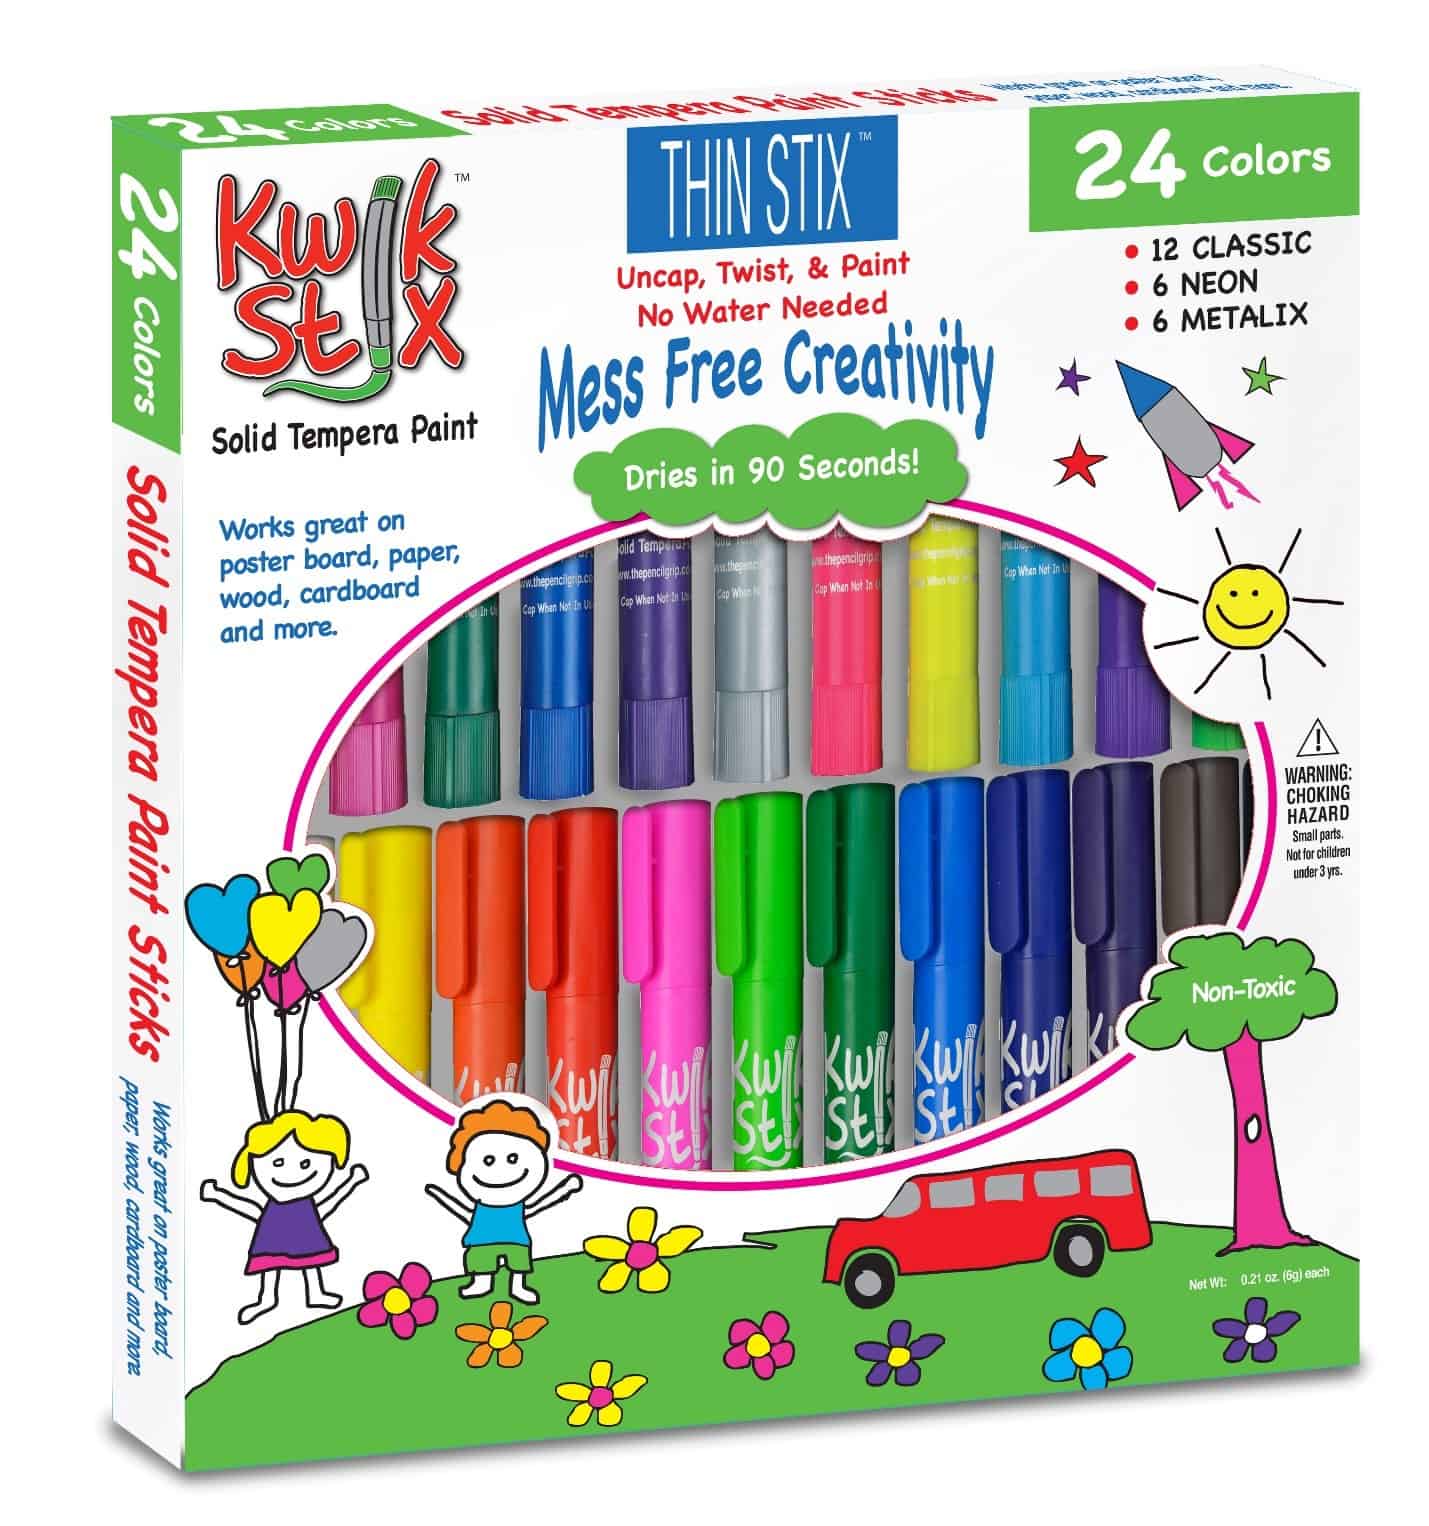 Keep kids creative without making a mess thanks to Thin Stix from Kwik Stix! Check out 5 fun art projects to make with them!